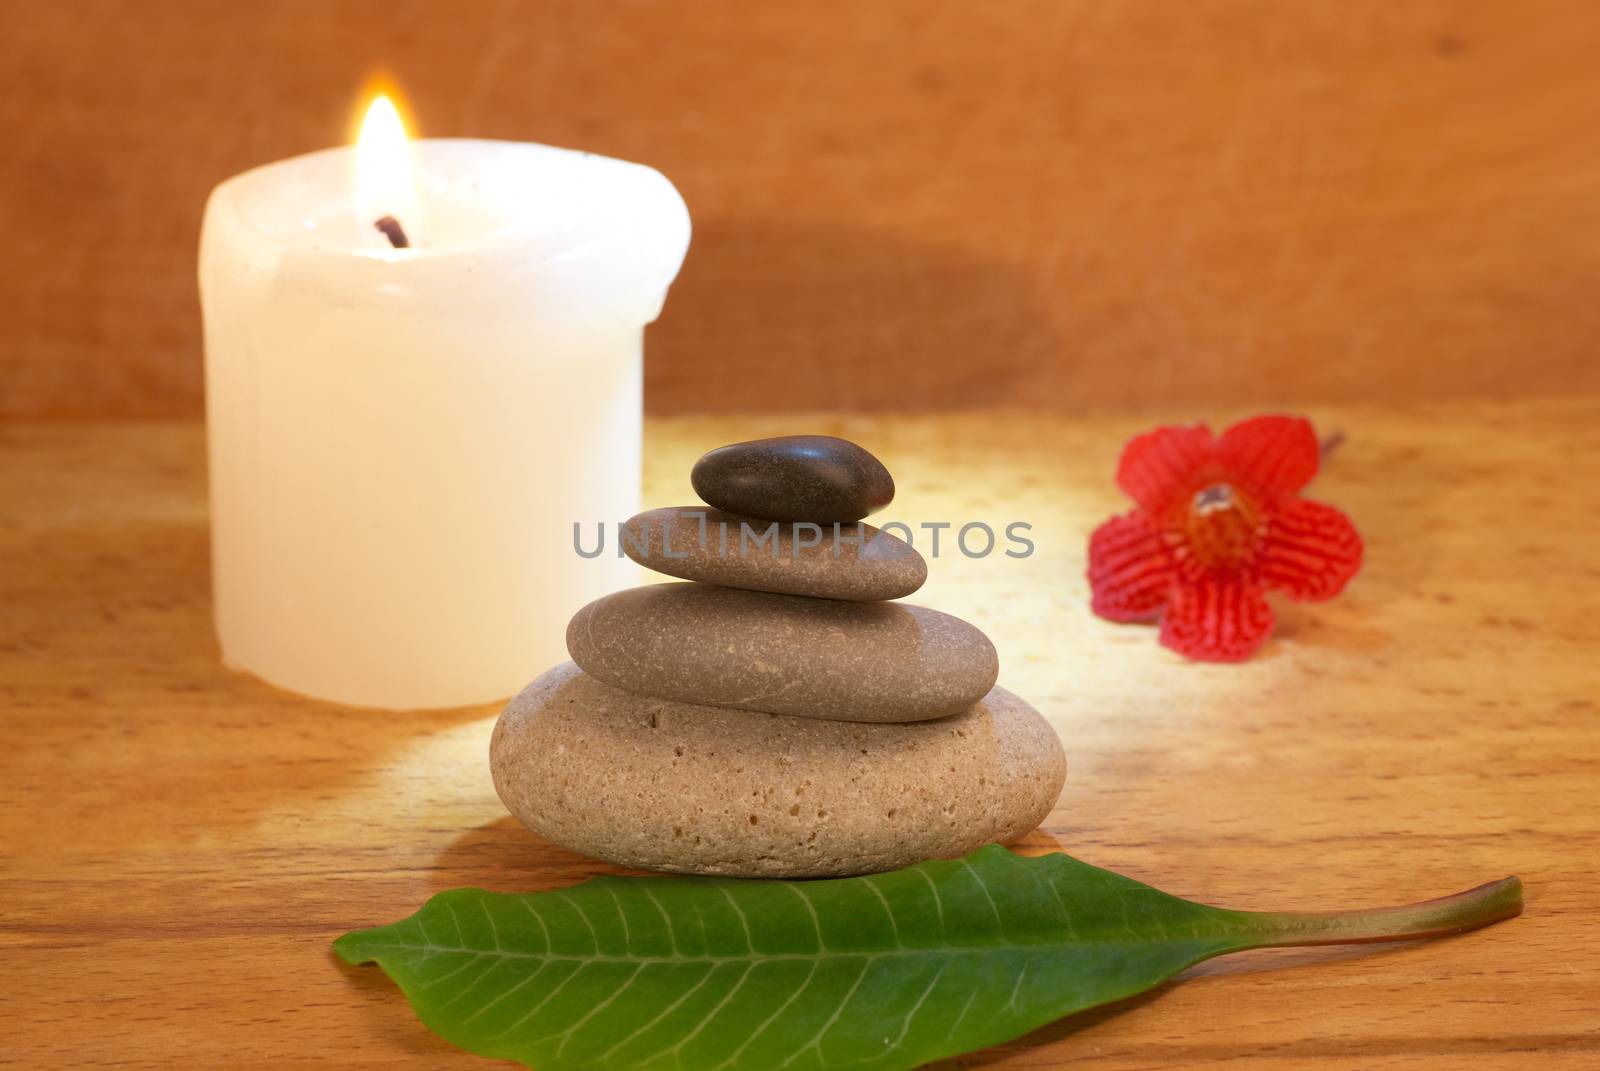 Spa concept with candle zen stones and wooden background